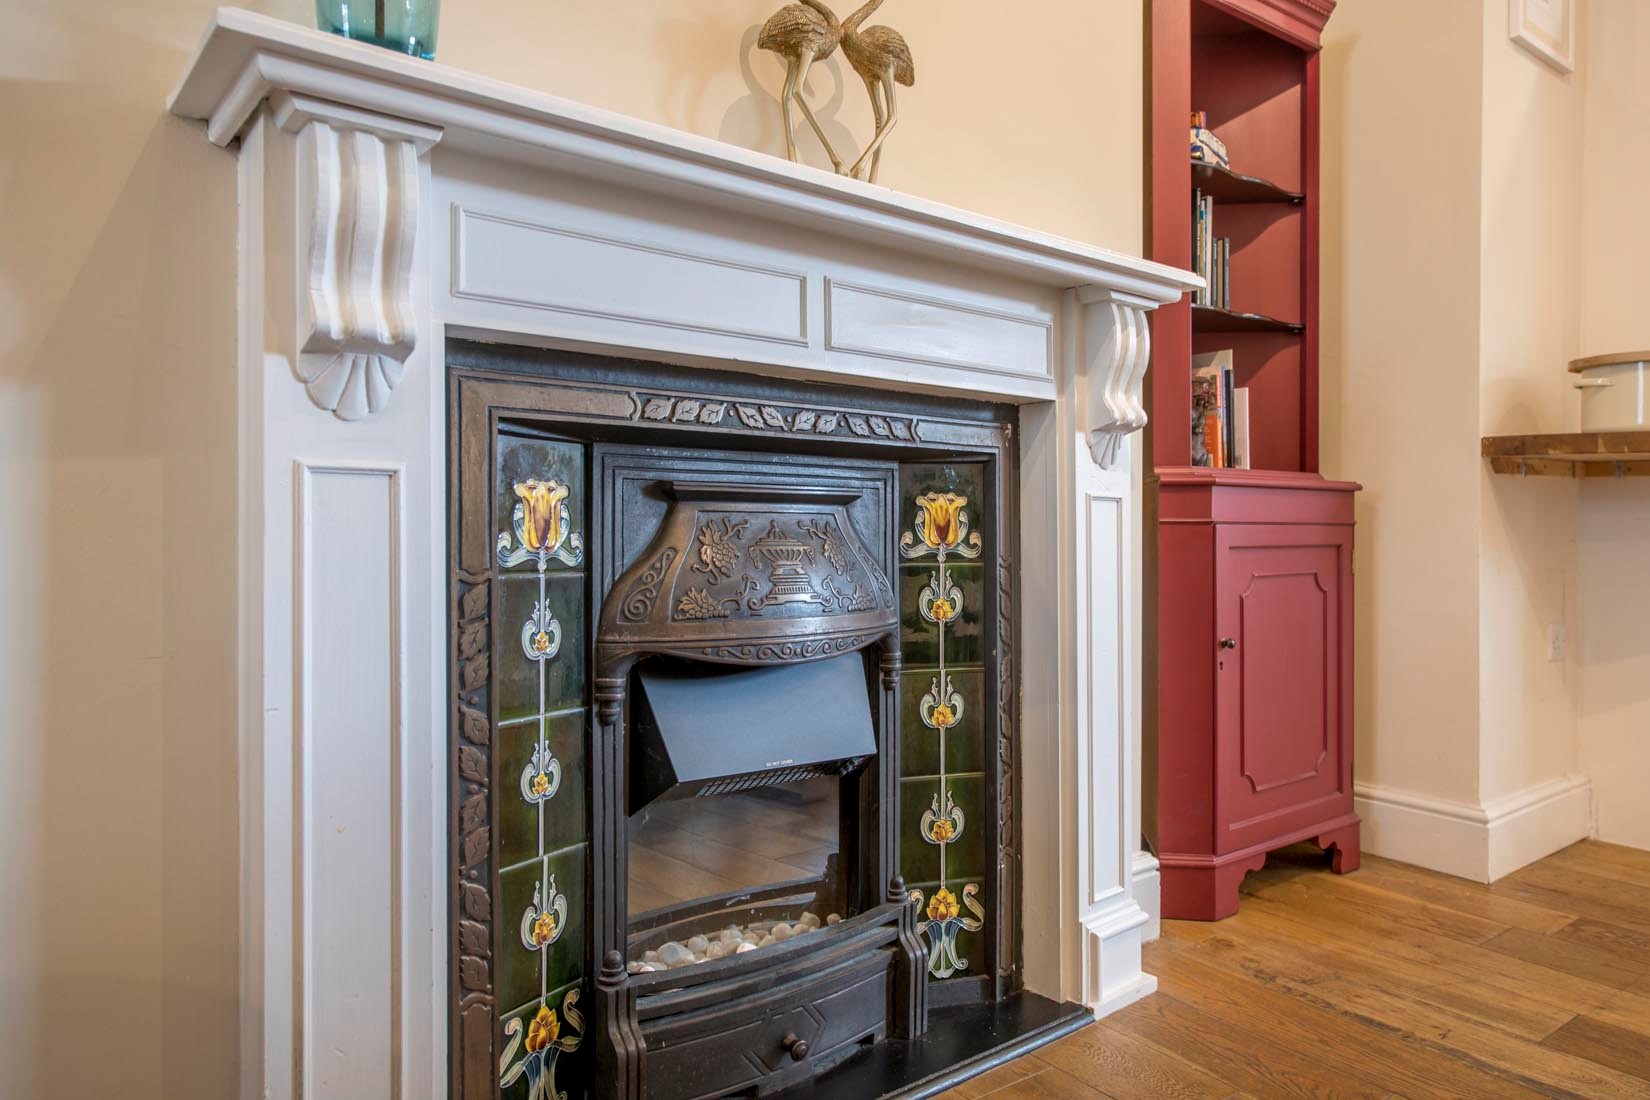 Number 109 - decorative fireplace in the dining area